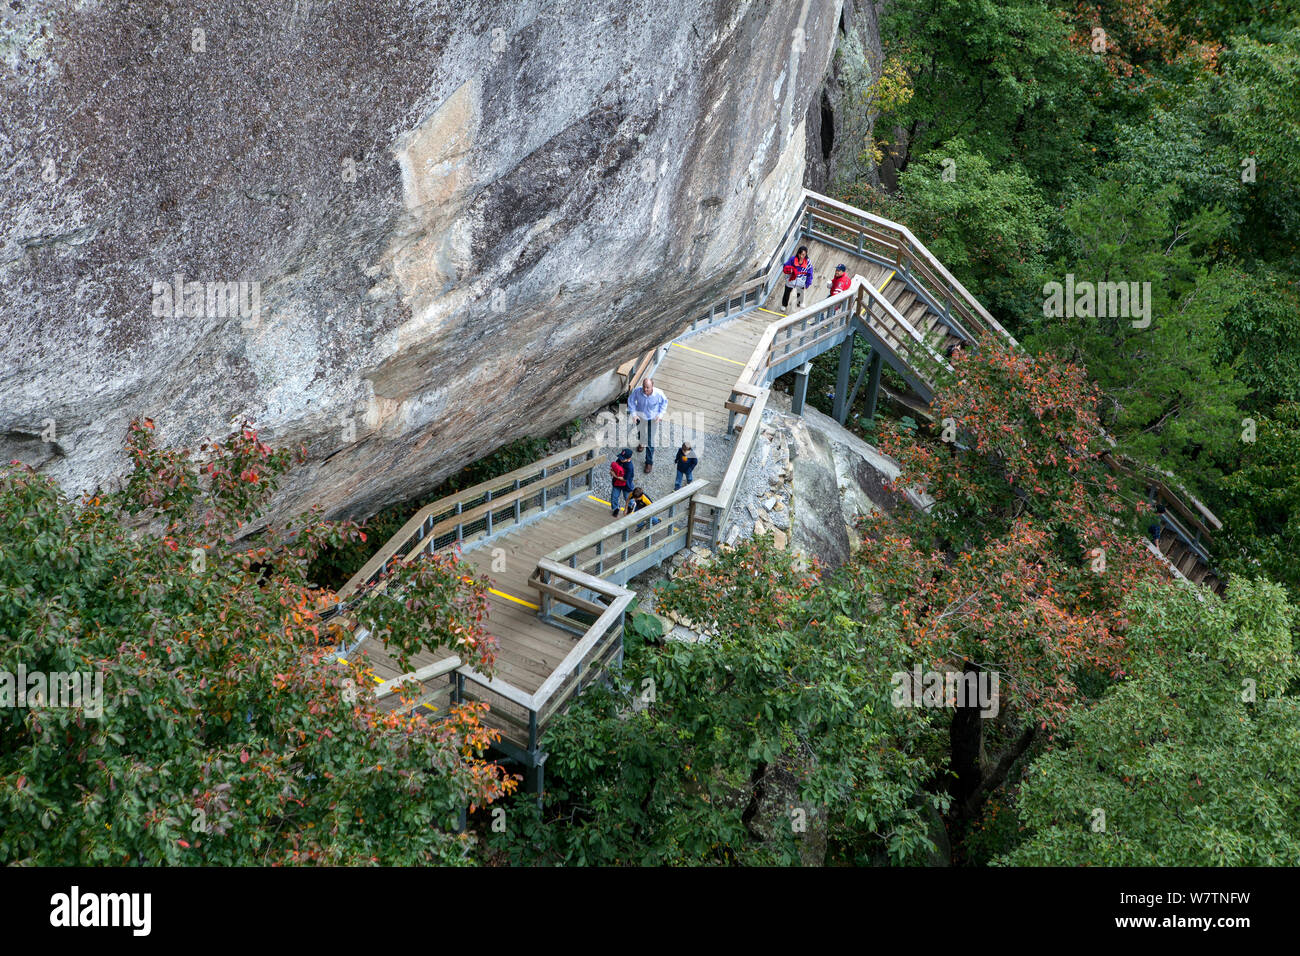 Part of the Skyline Trail in Chimney Rock State Park. North Carolina, USA, October 2013. Stock Photo